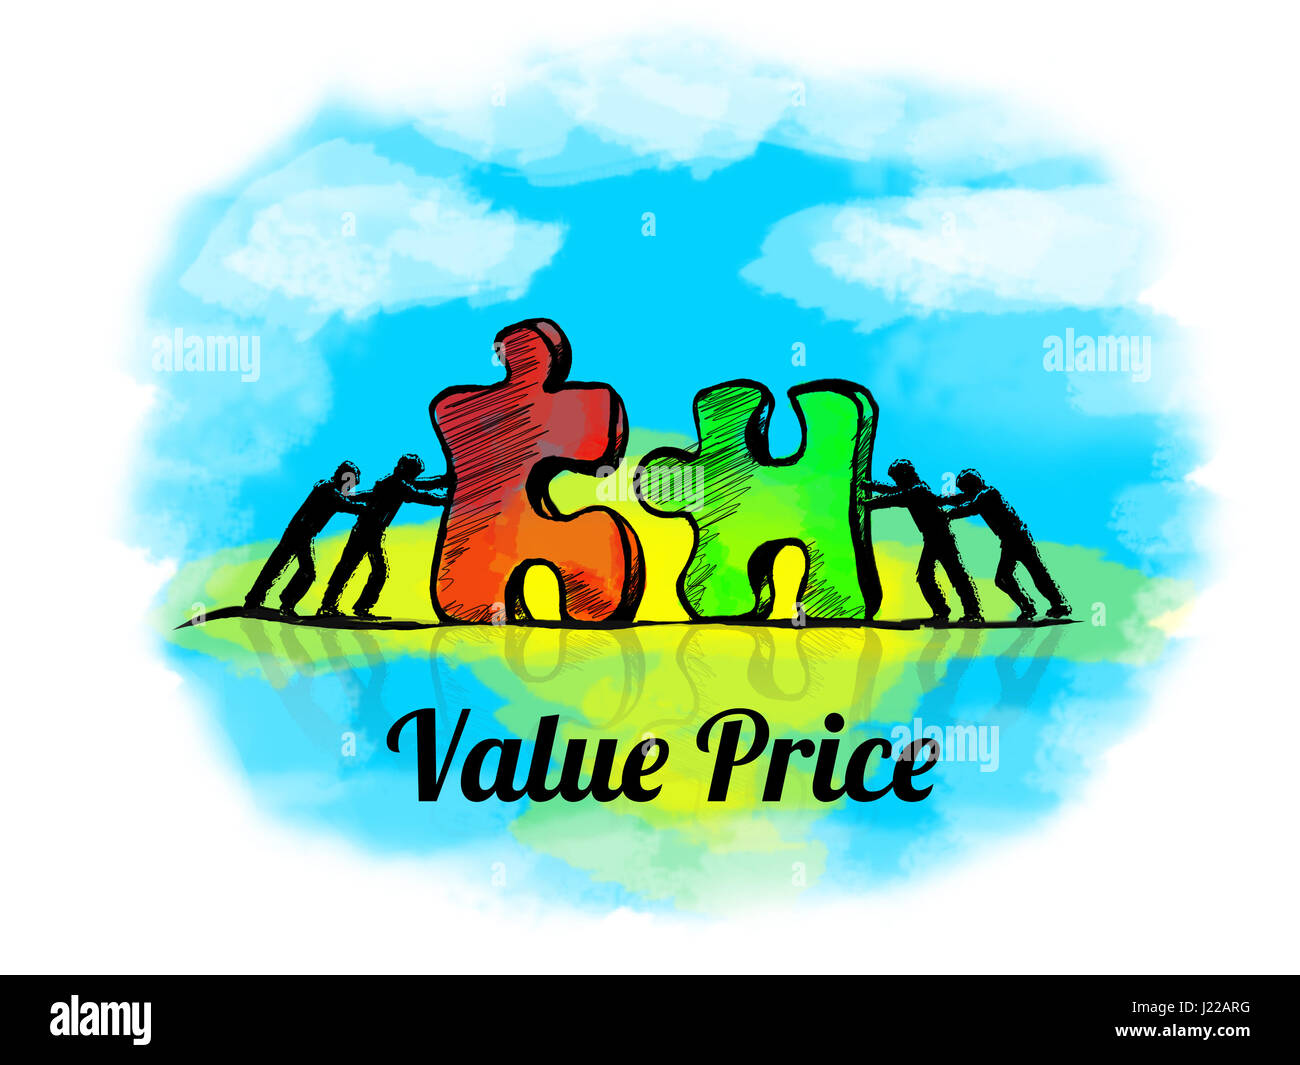 Illustration.Business concept of teamwork with jigsaw puzzle. Value Price Stock Photo